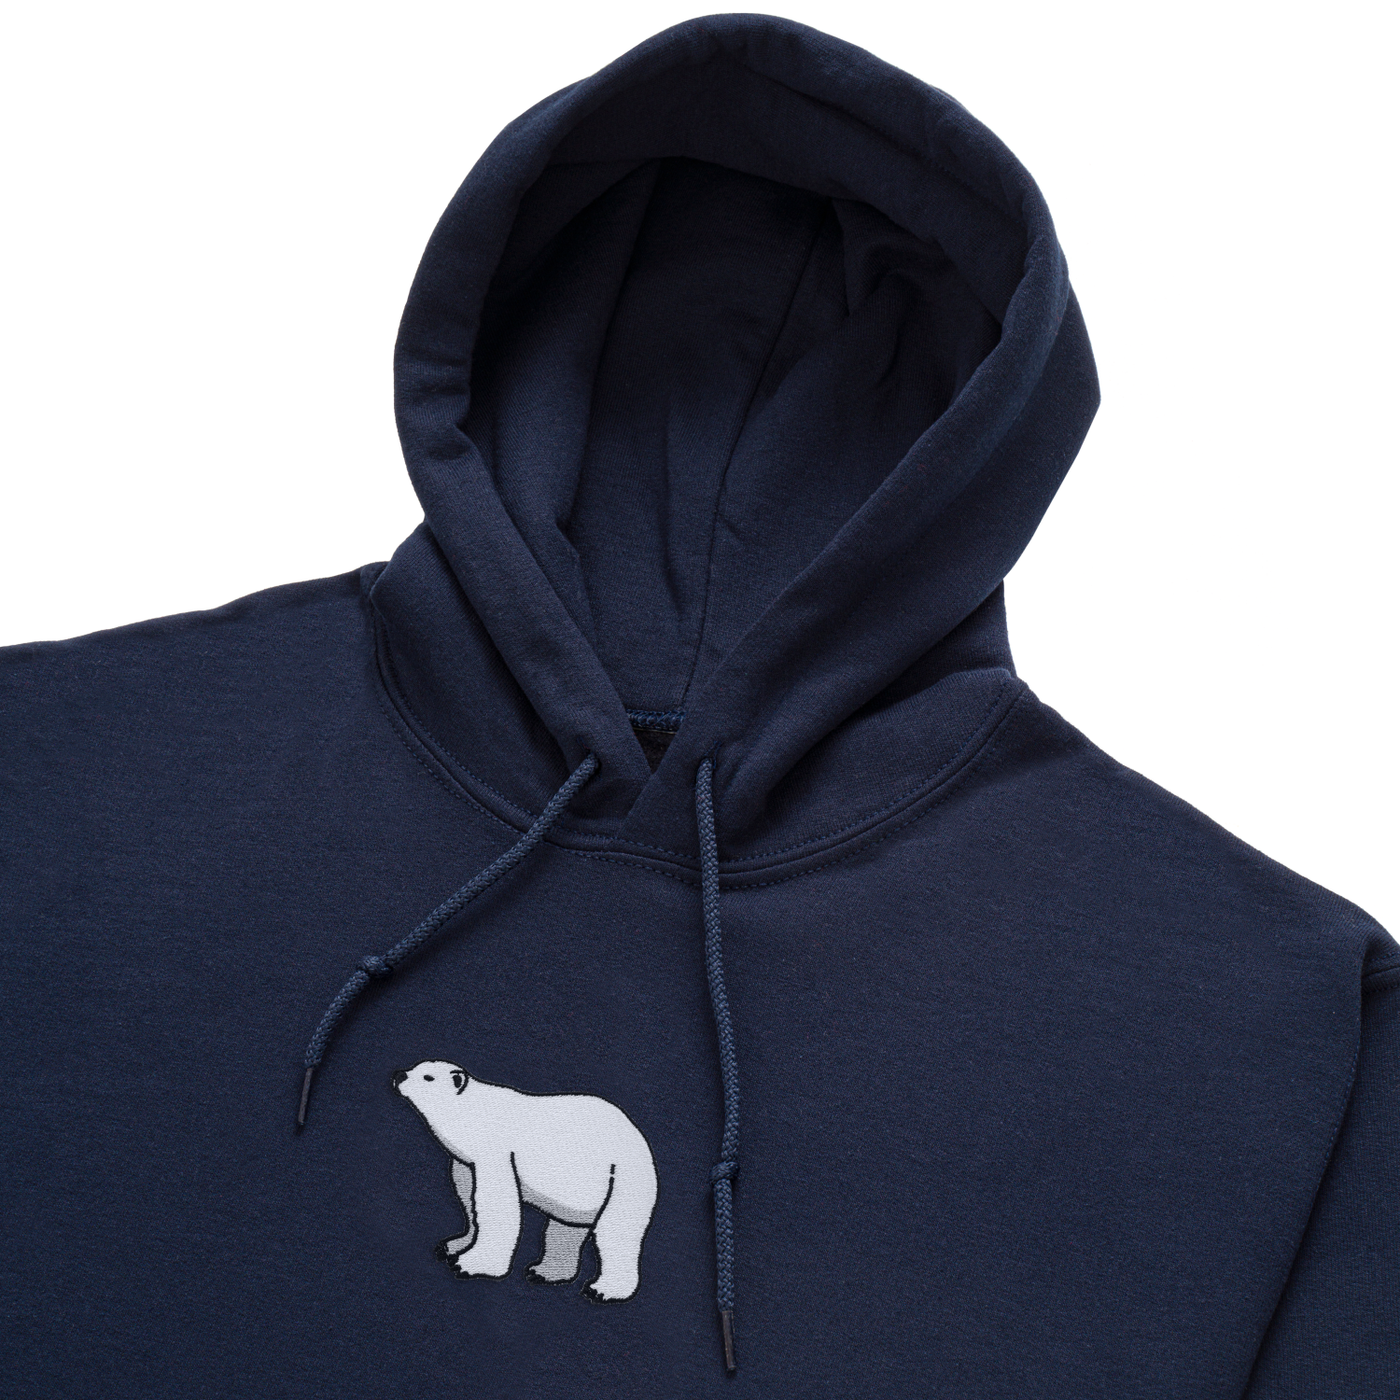 Bobby's Planet Men's Embroidered Polar Bear Hoodie from Arctic Polar Animals Collection in Navy Color#color_navy